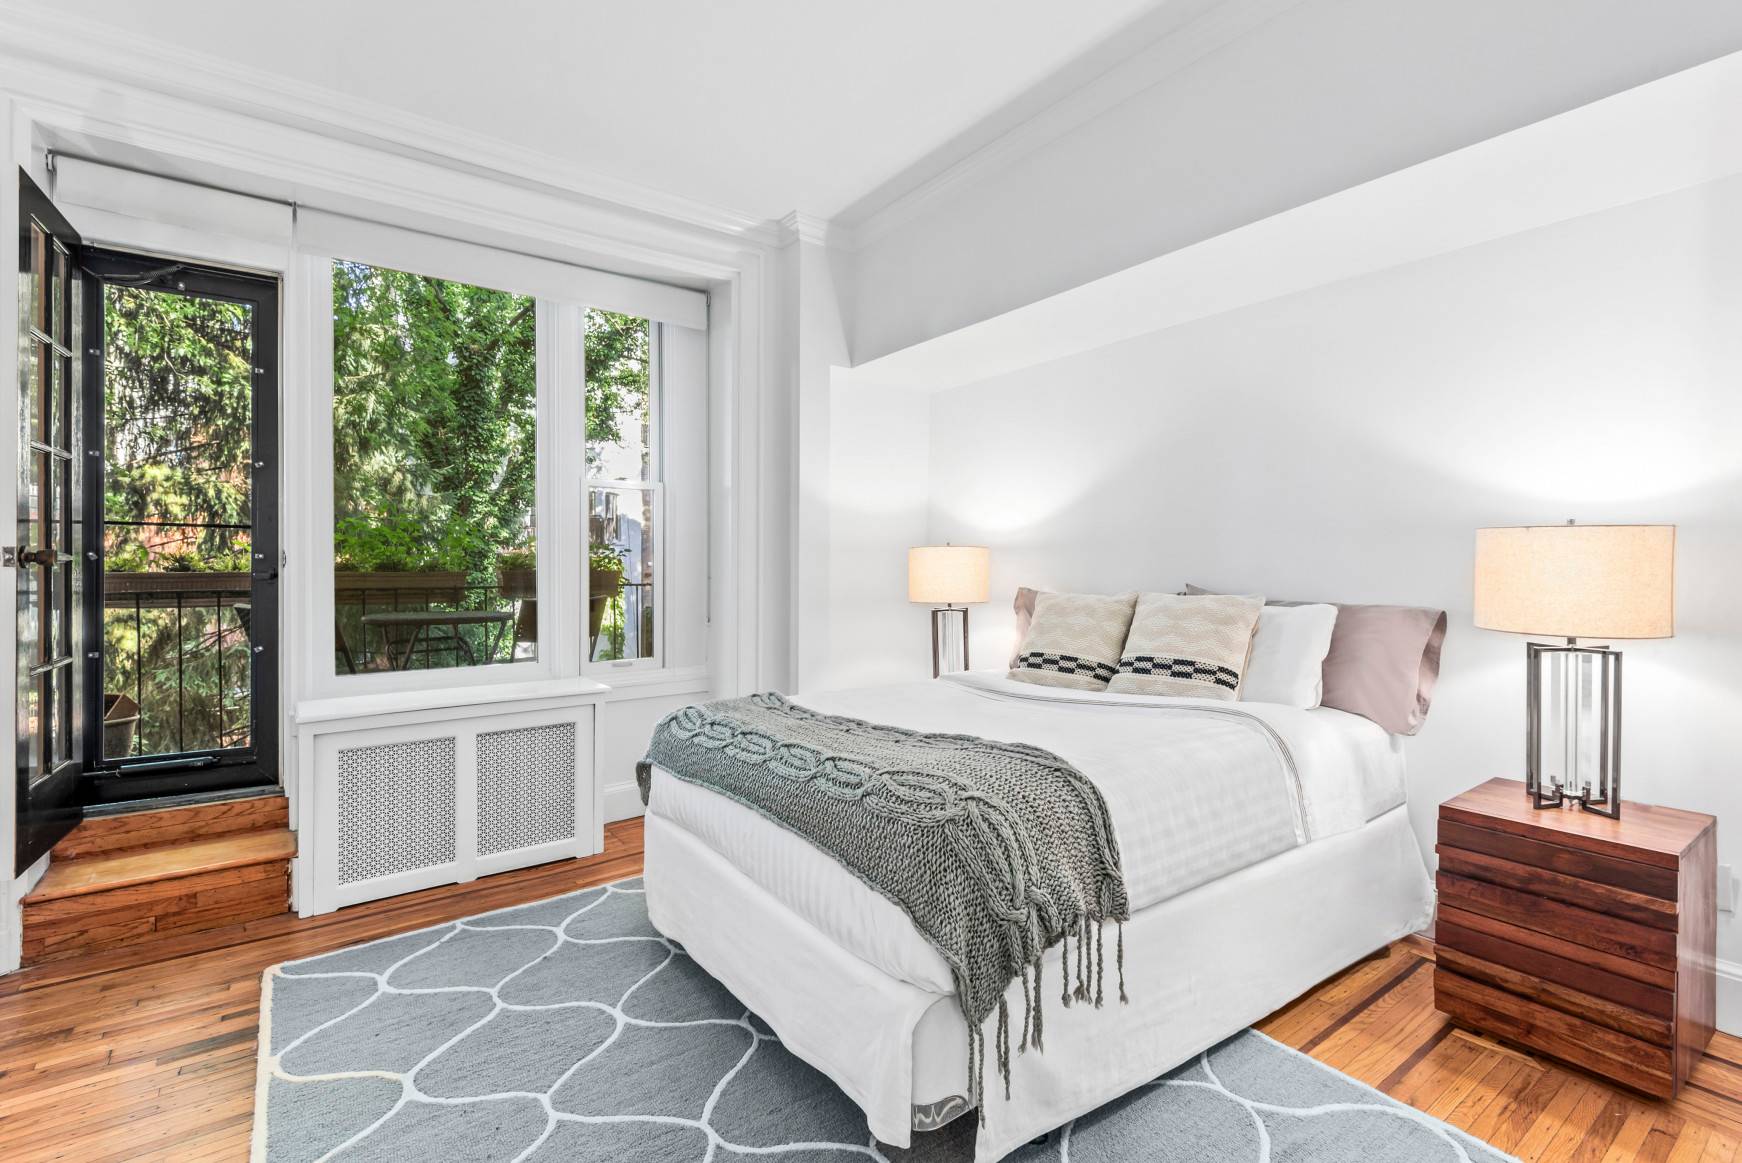 Discover this prewar gem on one of Historic Brooklyn Heights' premier tree lined blocks.